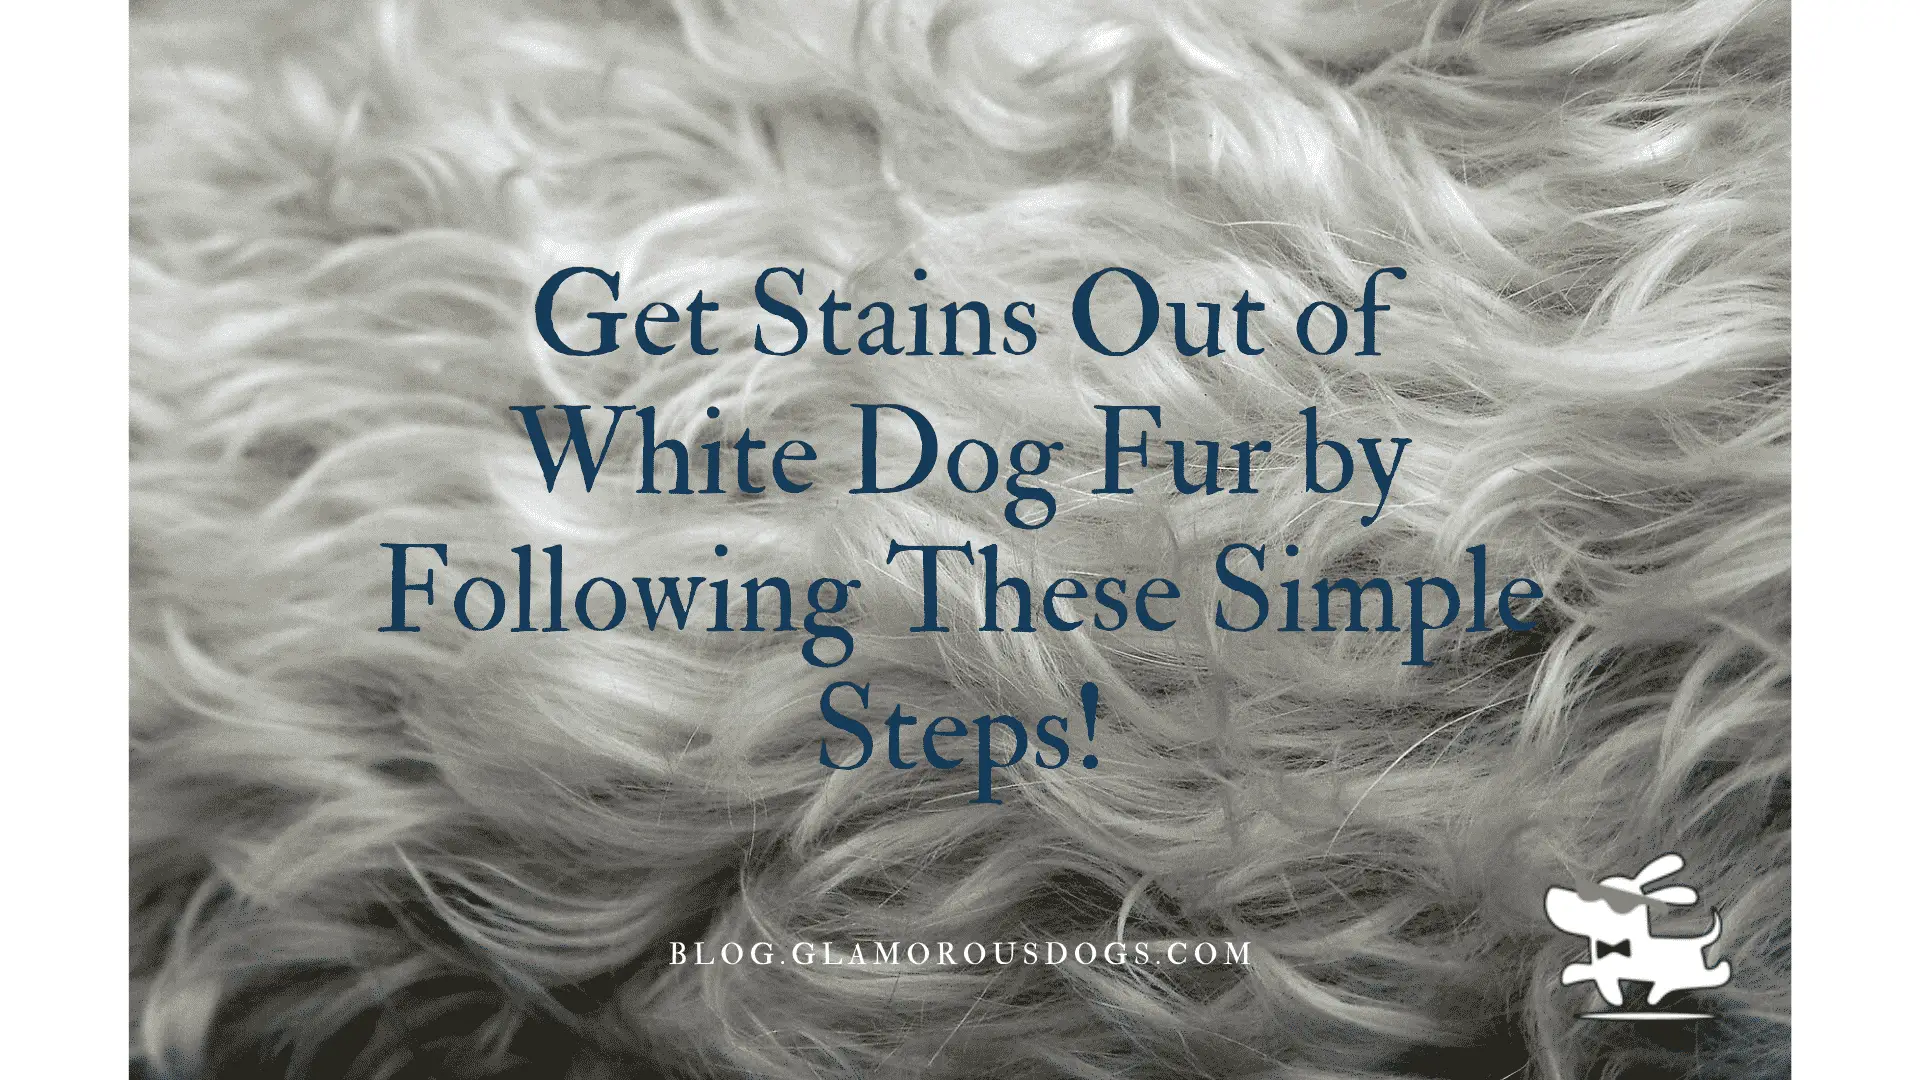 Get Stains Out of White Dog Fur by Following These Simple Steps! | Glamorous Dogs